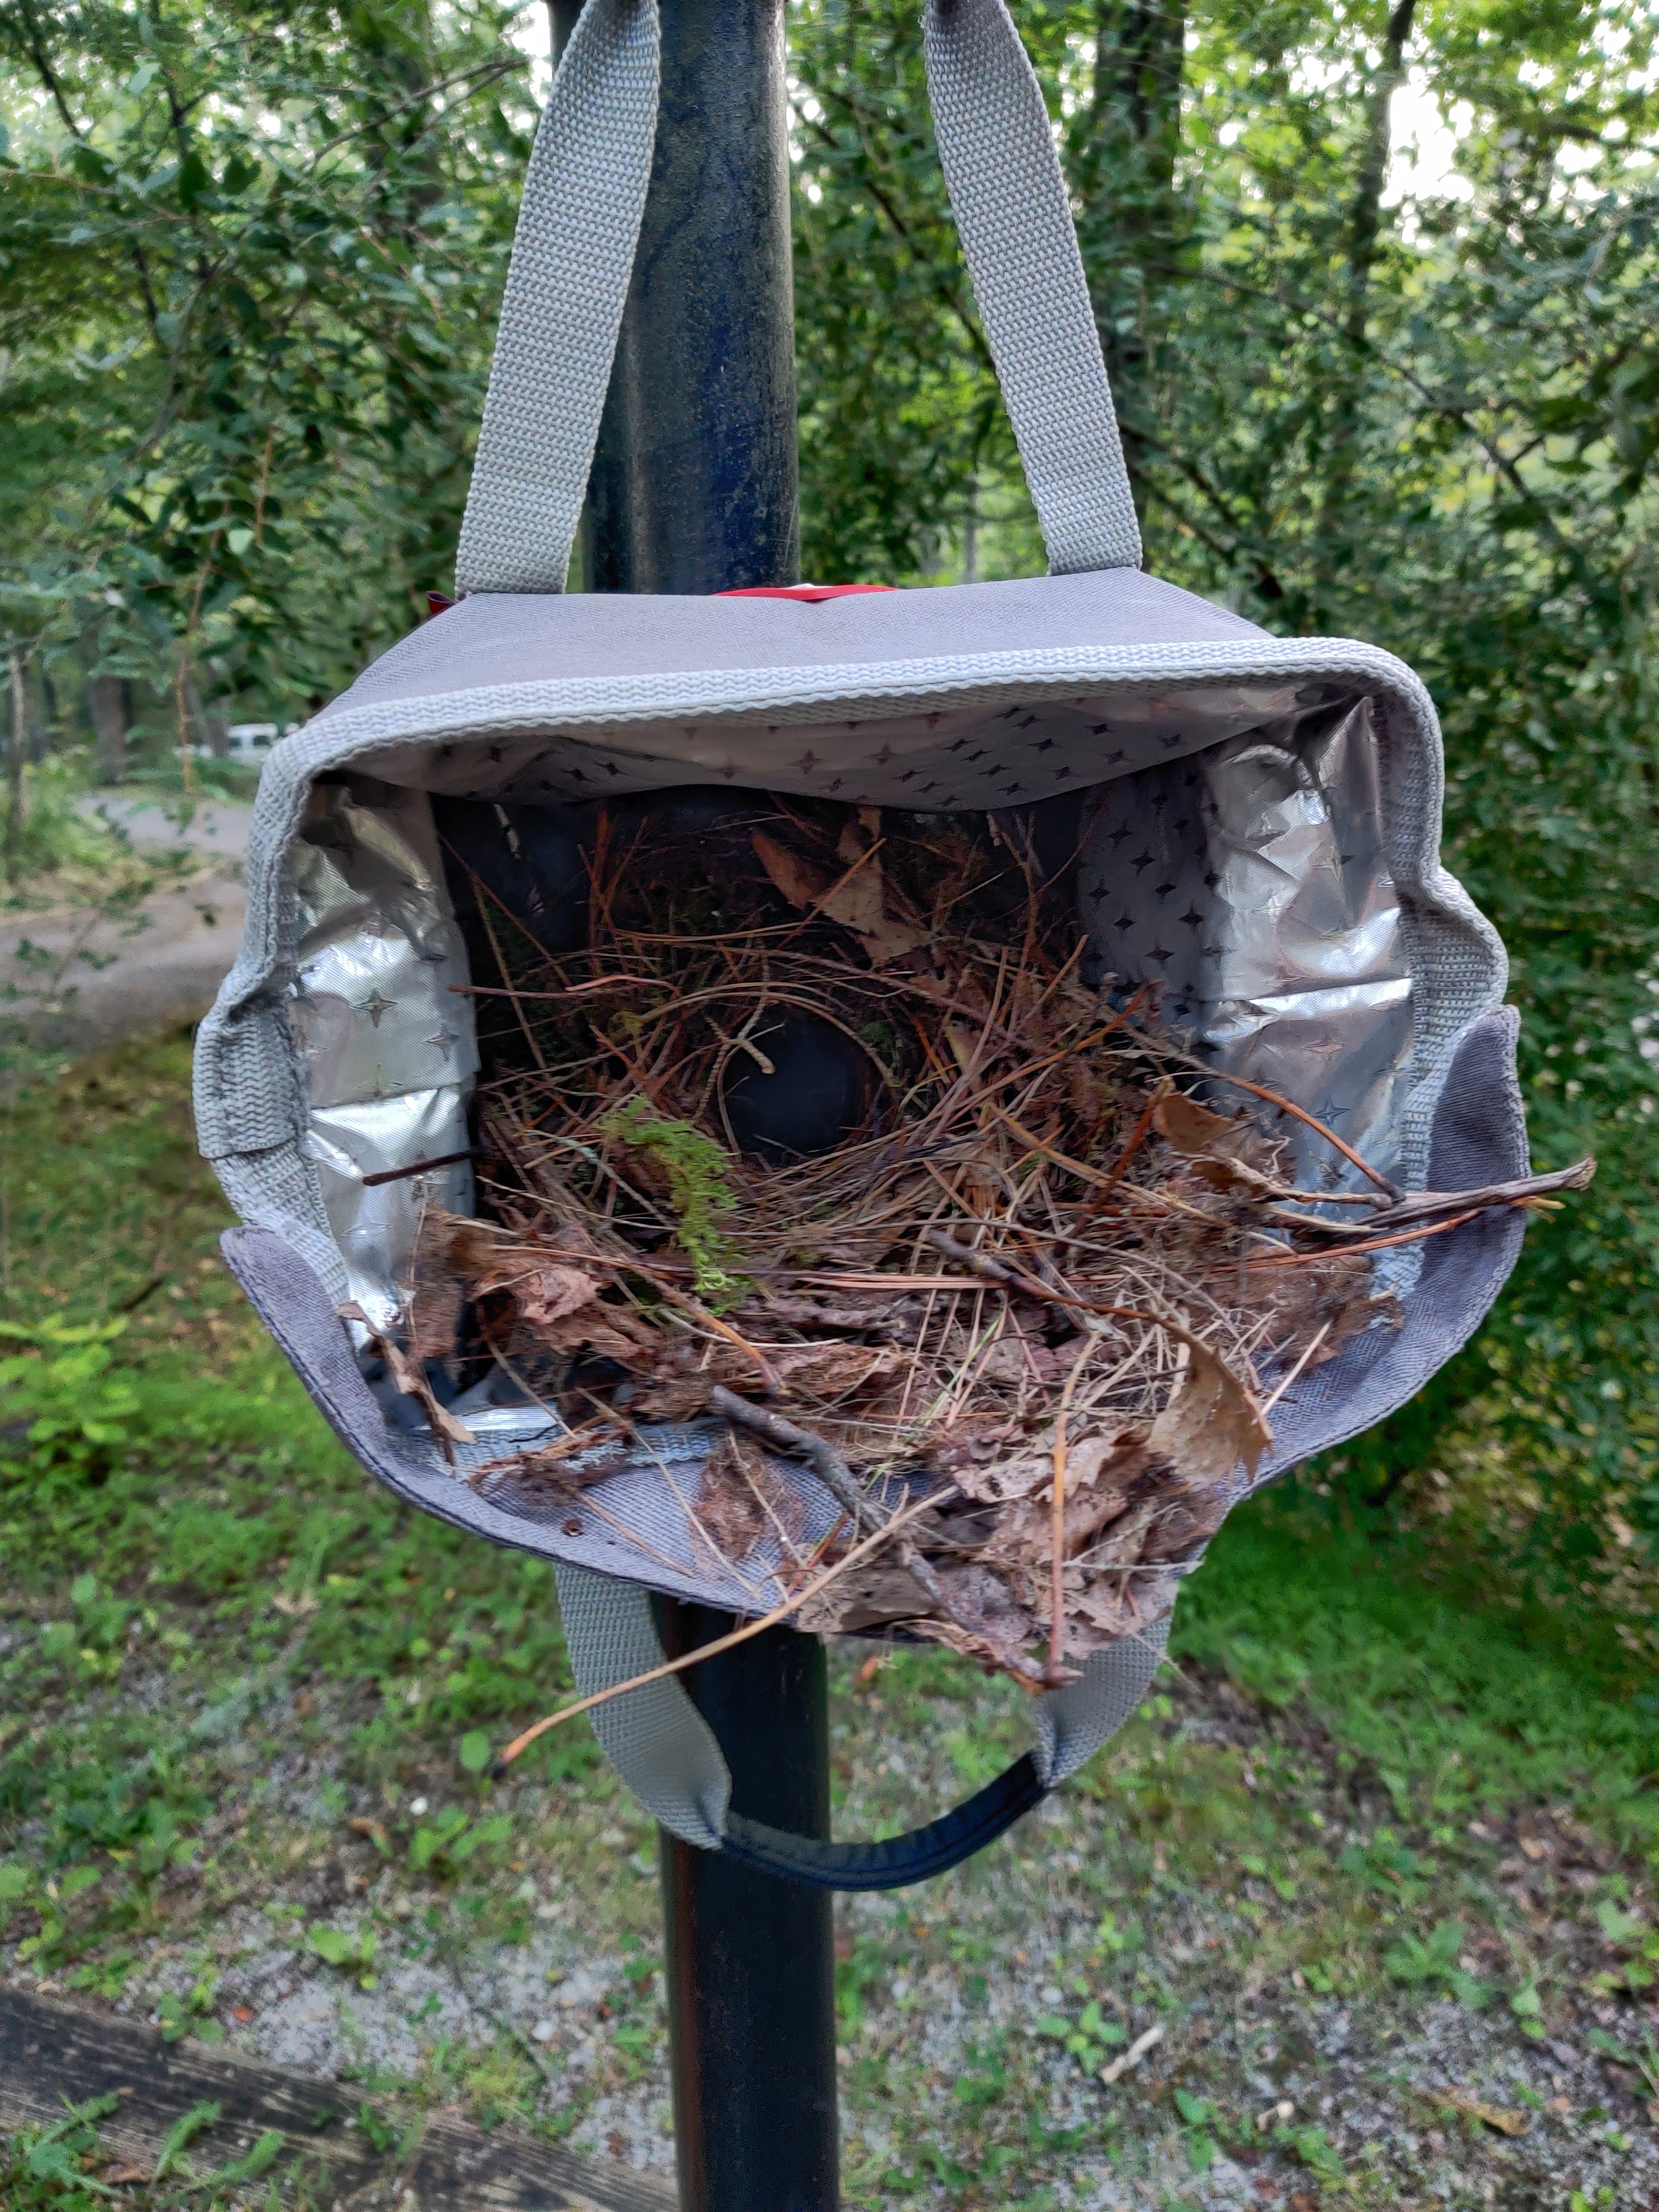 Hung our little cooler up to dry while we left, and a bird made a home out of it!